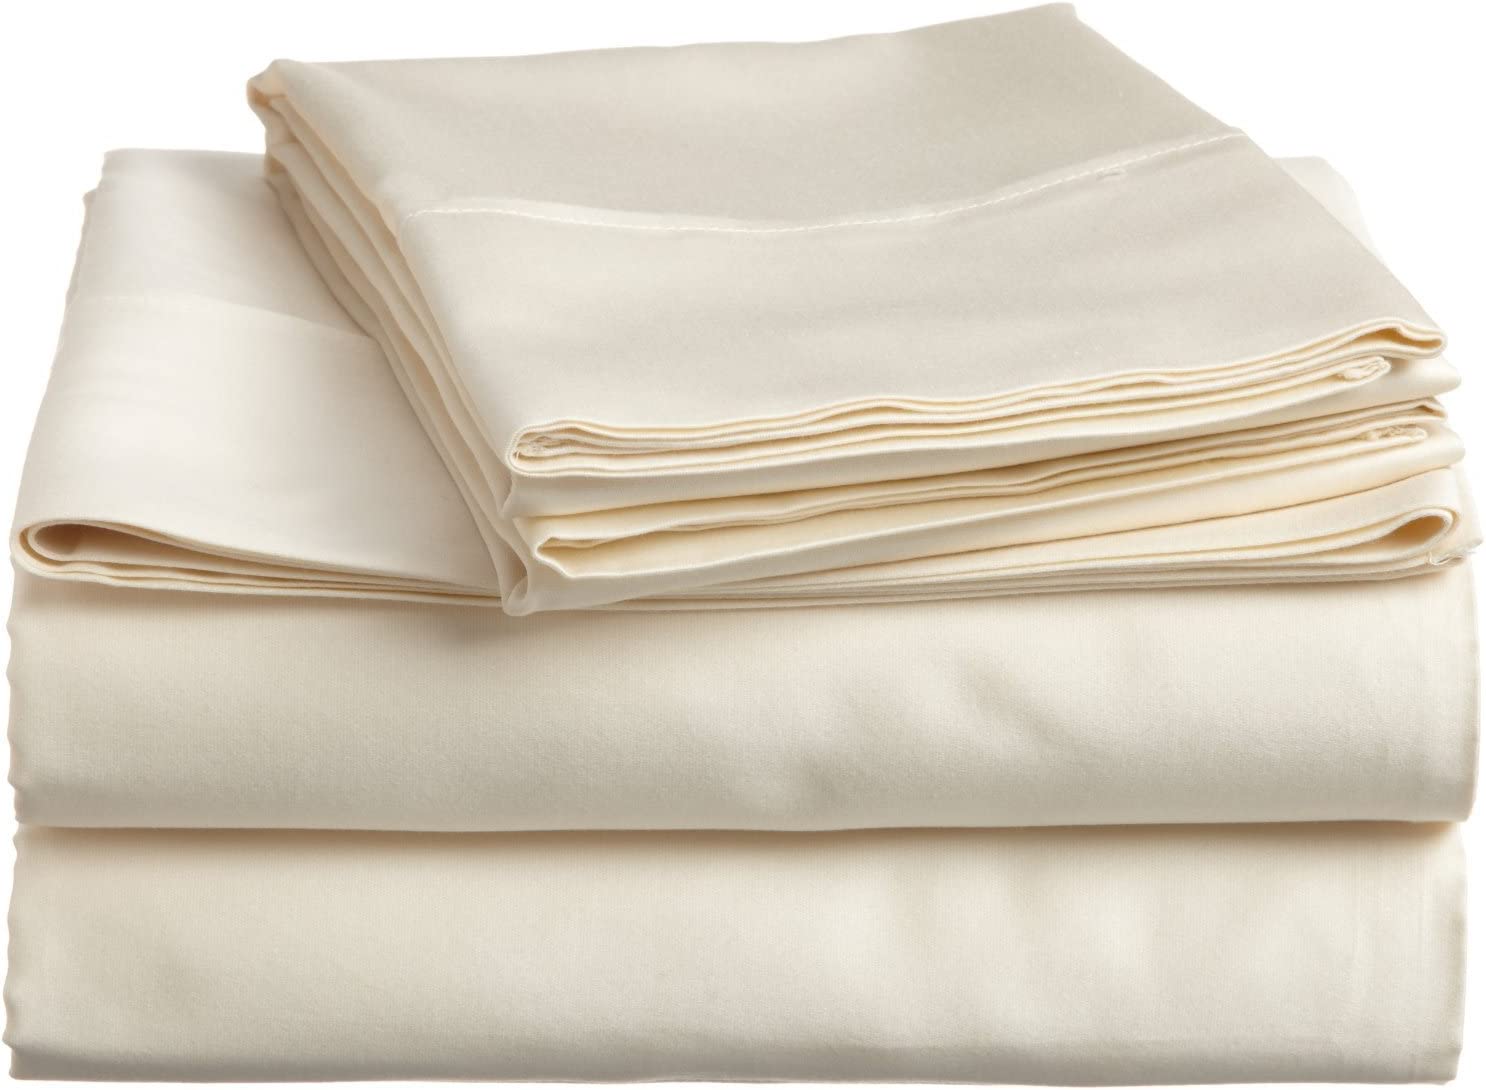 10 Inch Pocket Fitted Sheet Egyptian Cotton Bottom Sheets Ivory at-EgyptianHomeLinens.com